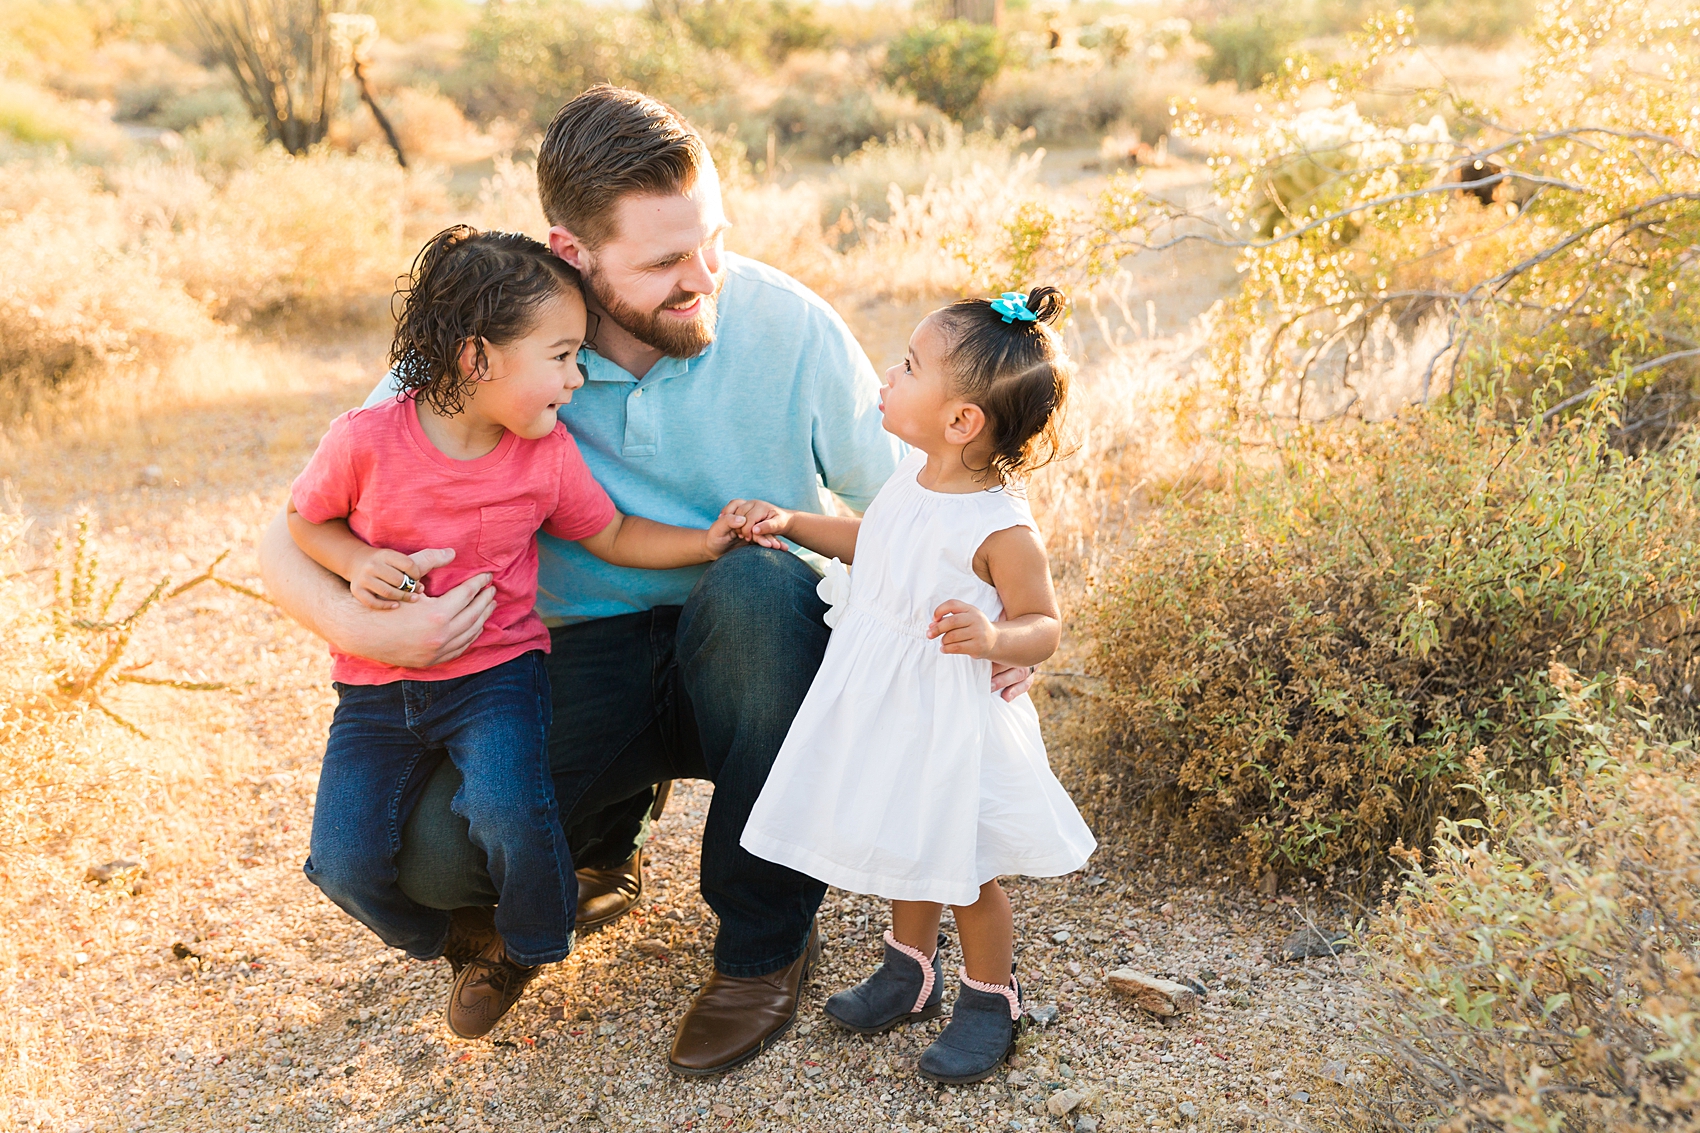 Leah Hope Photography | Scottsdale Phoenix Arizona | Desert Landscape Cactus Scenery Sunset Pictures | Family Photos | What to Wear | How to Pose | Family Posing | Maternity Pictures | Pregnancy Photos | Bump Photos | Styling